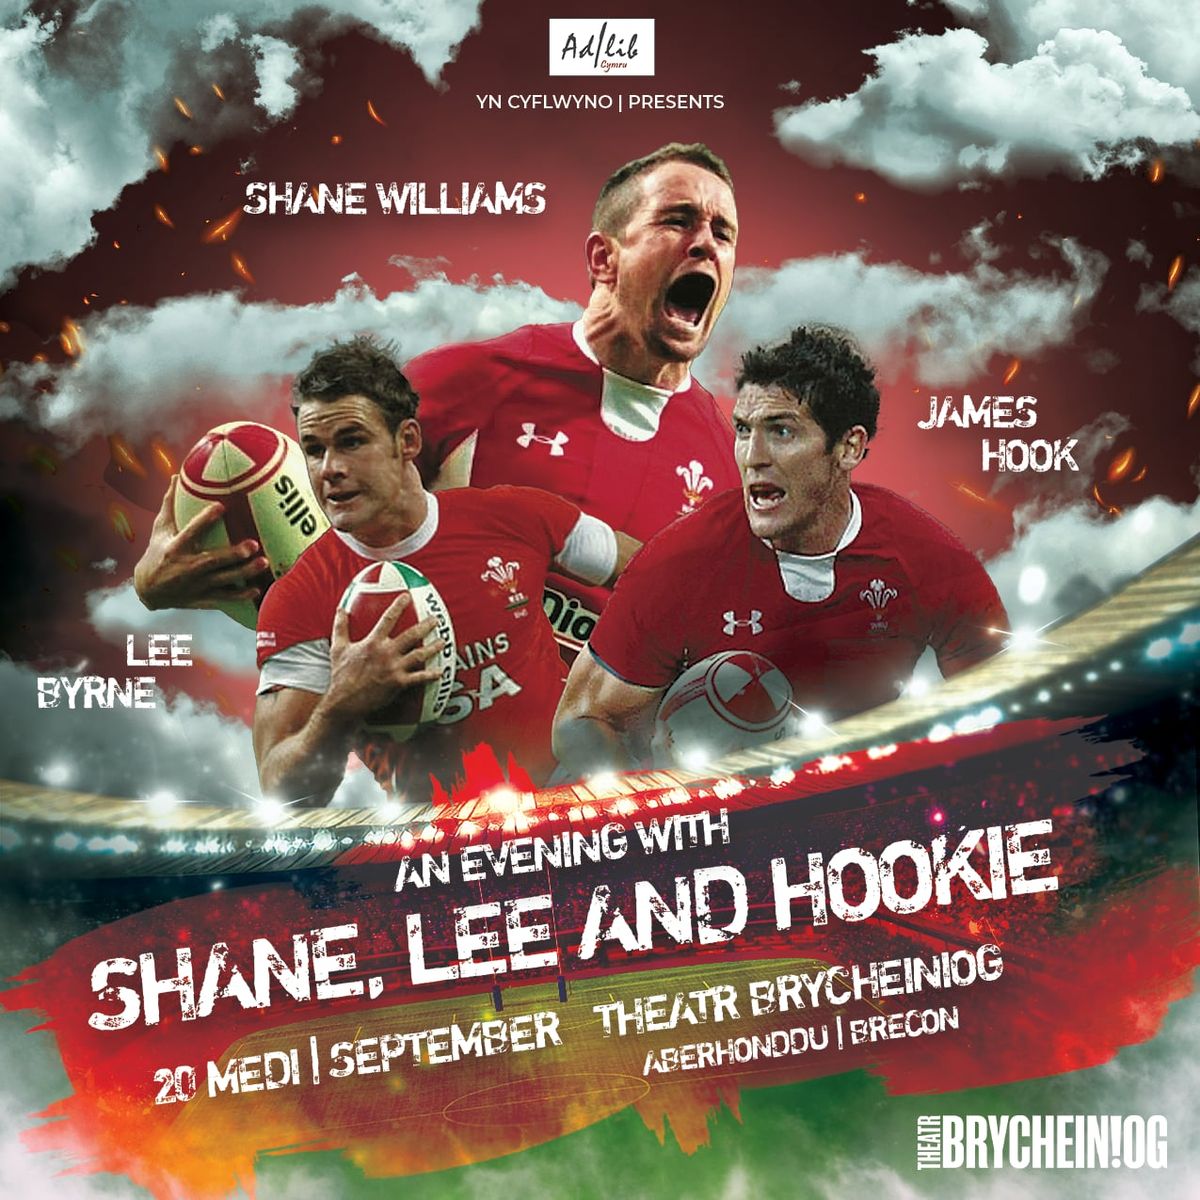 AN EVENING WITH SHANE, LEE & HOOKIE